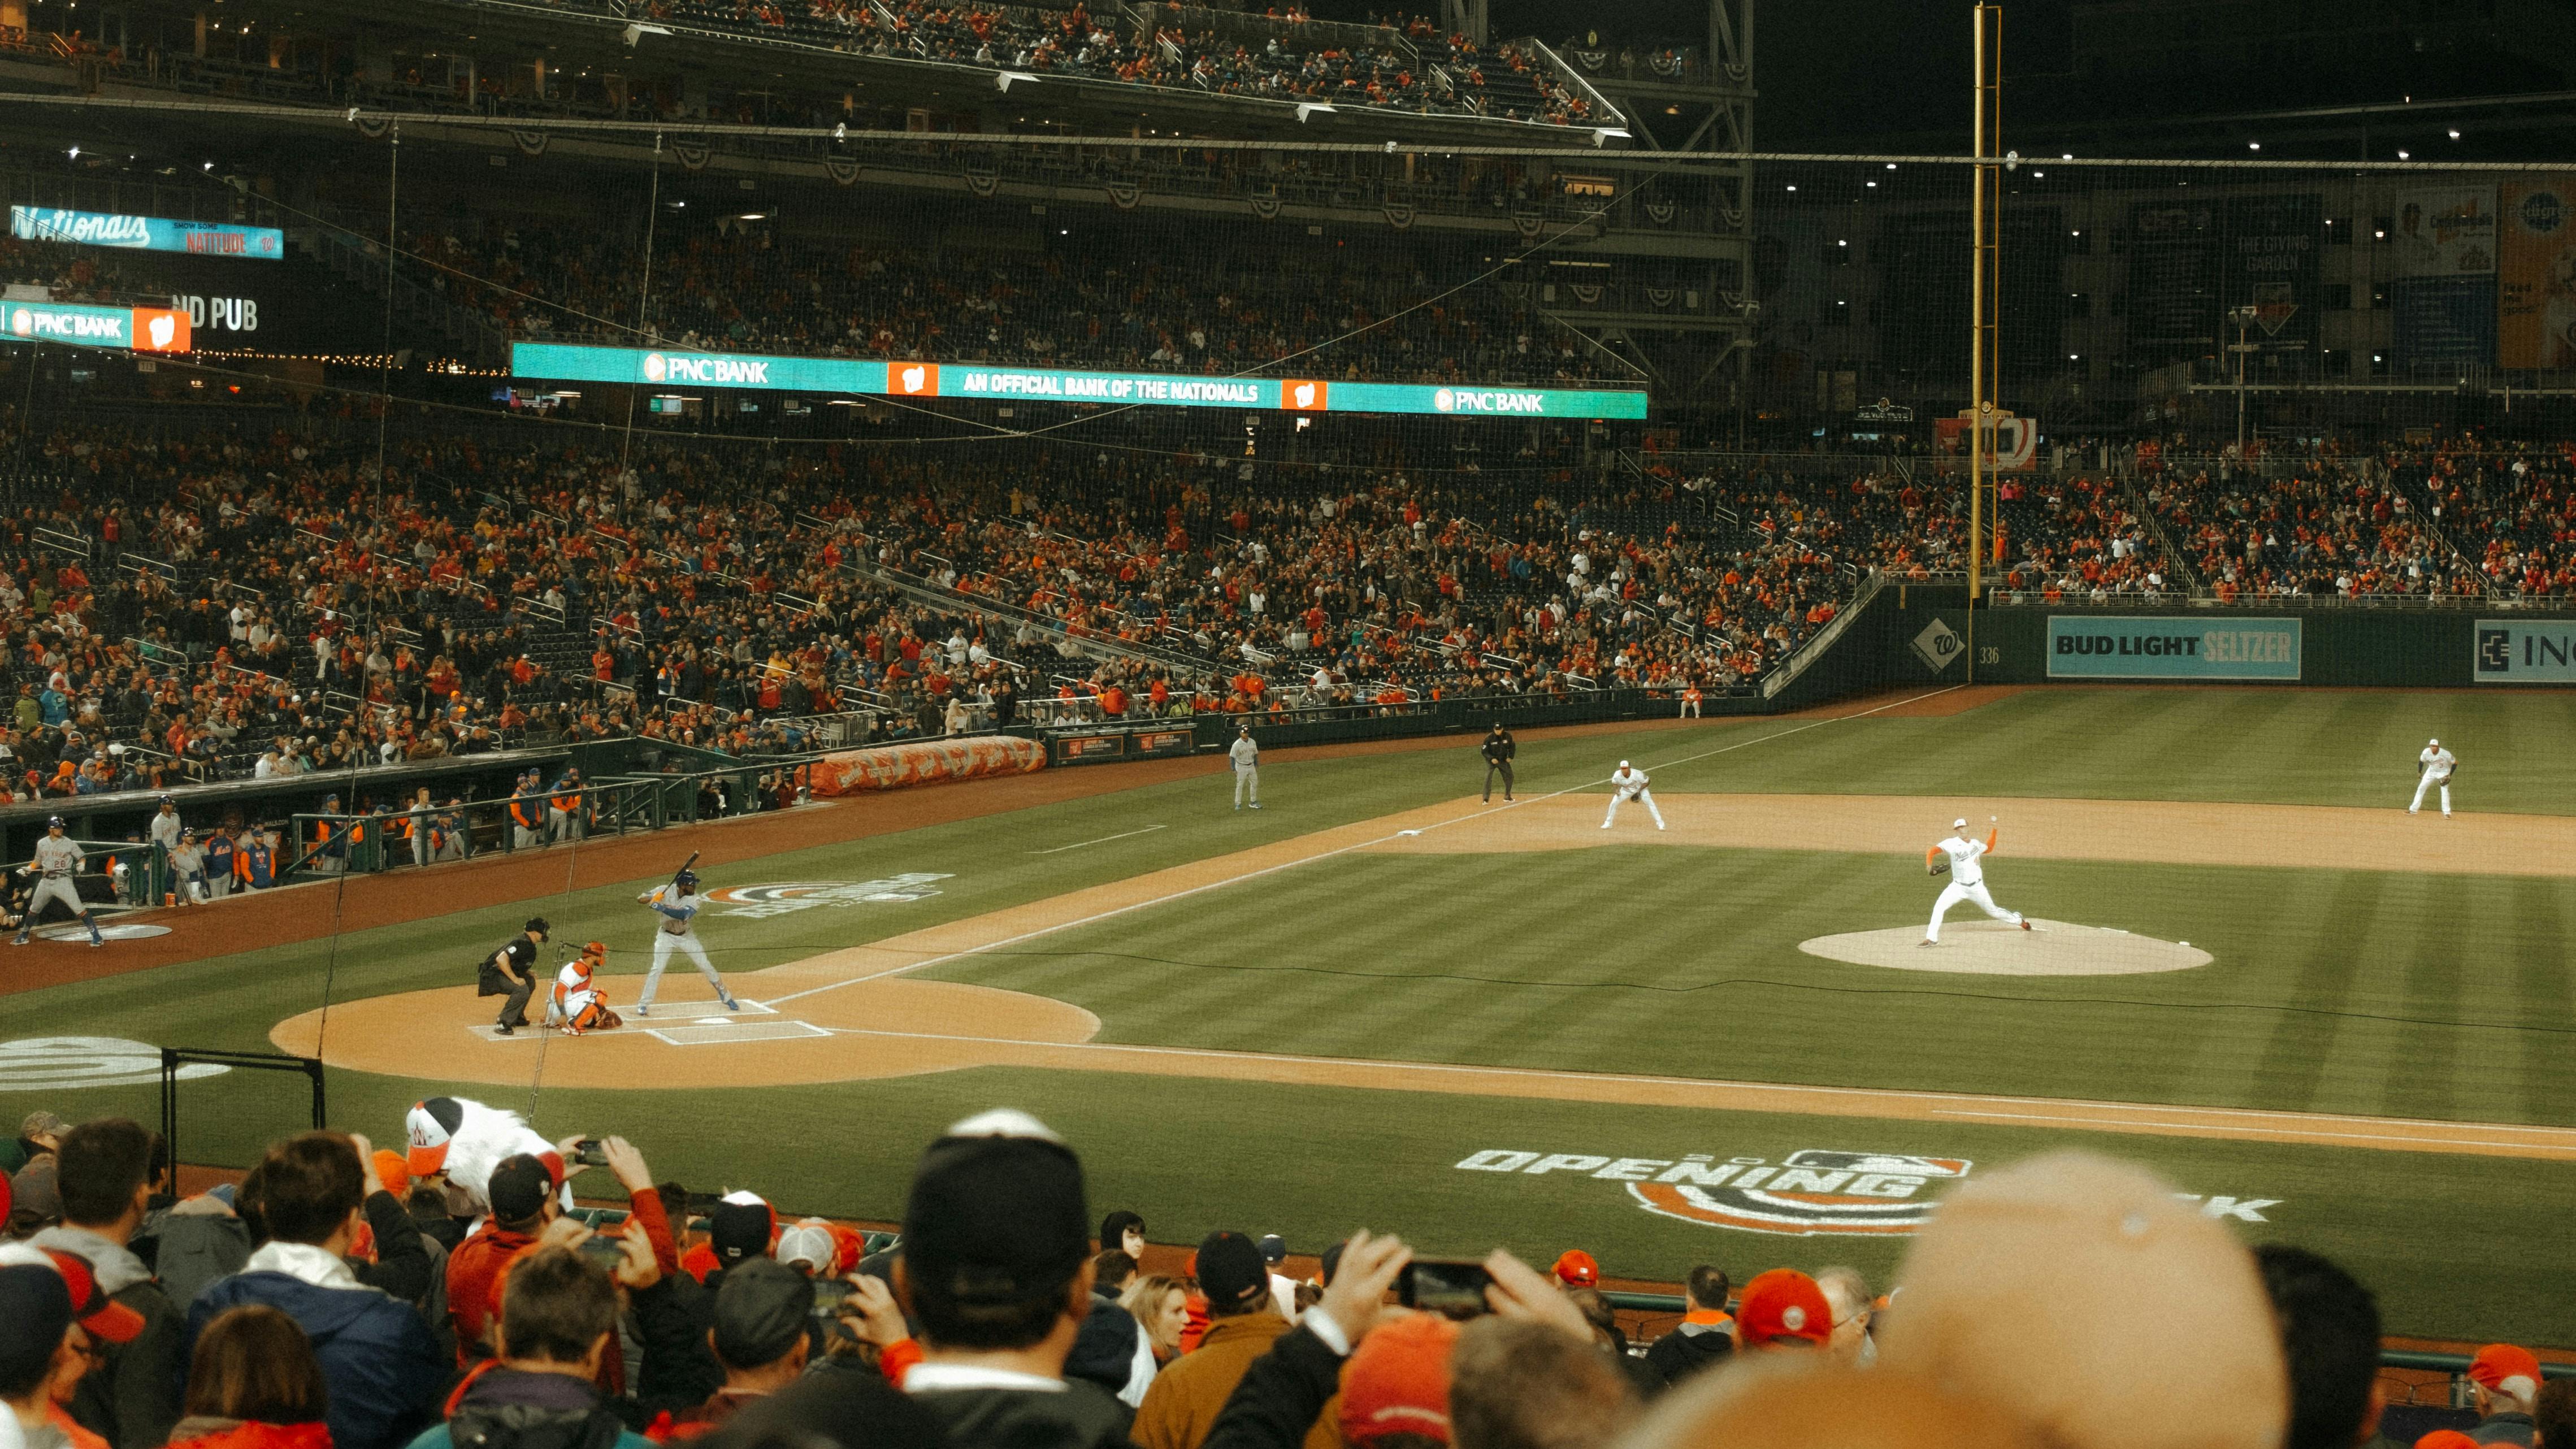 Guide to Washington Nationals Baseball in DC